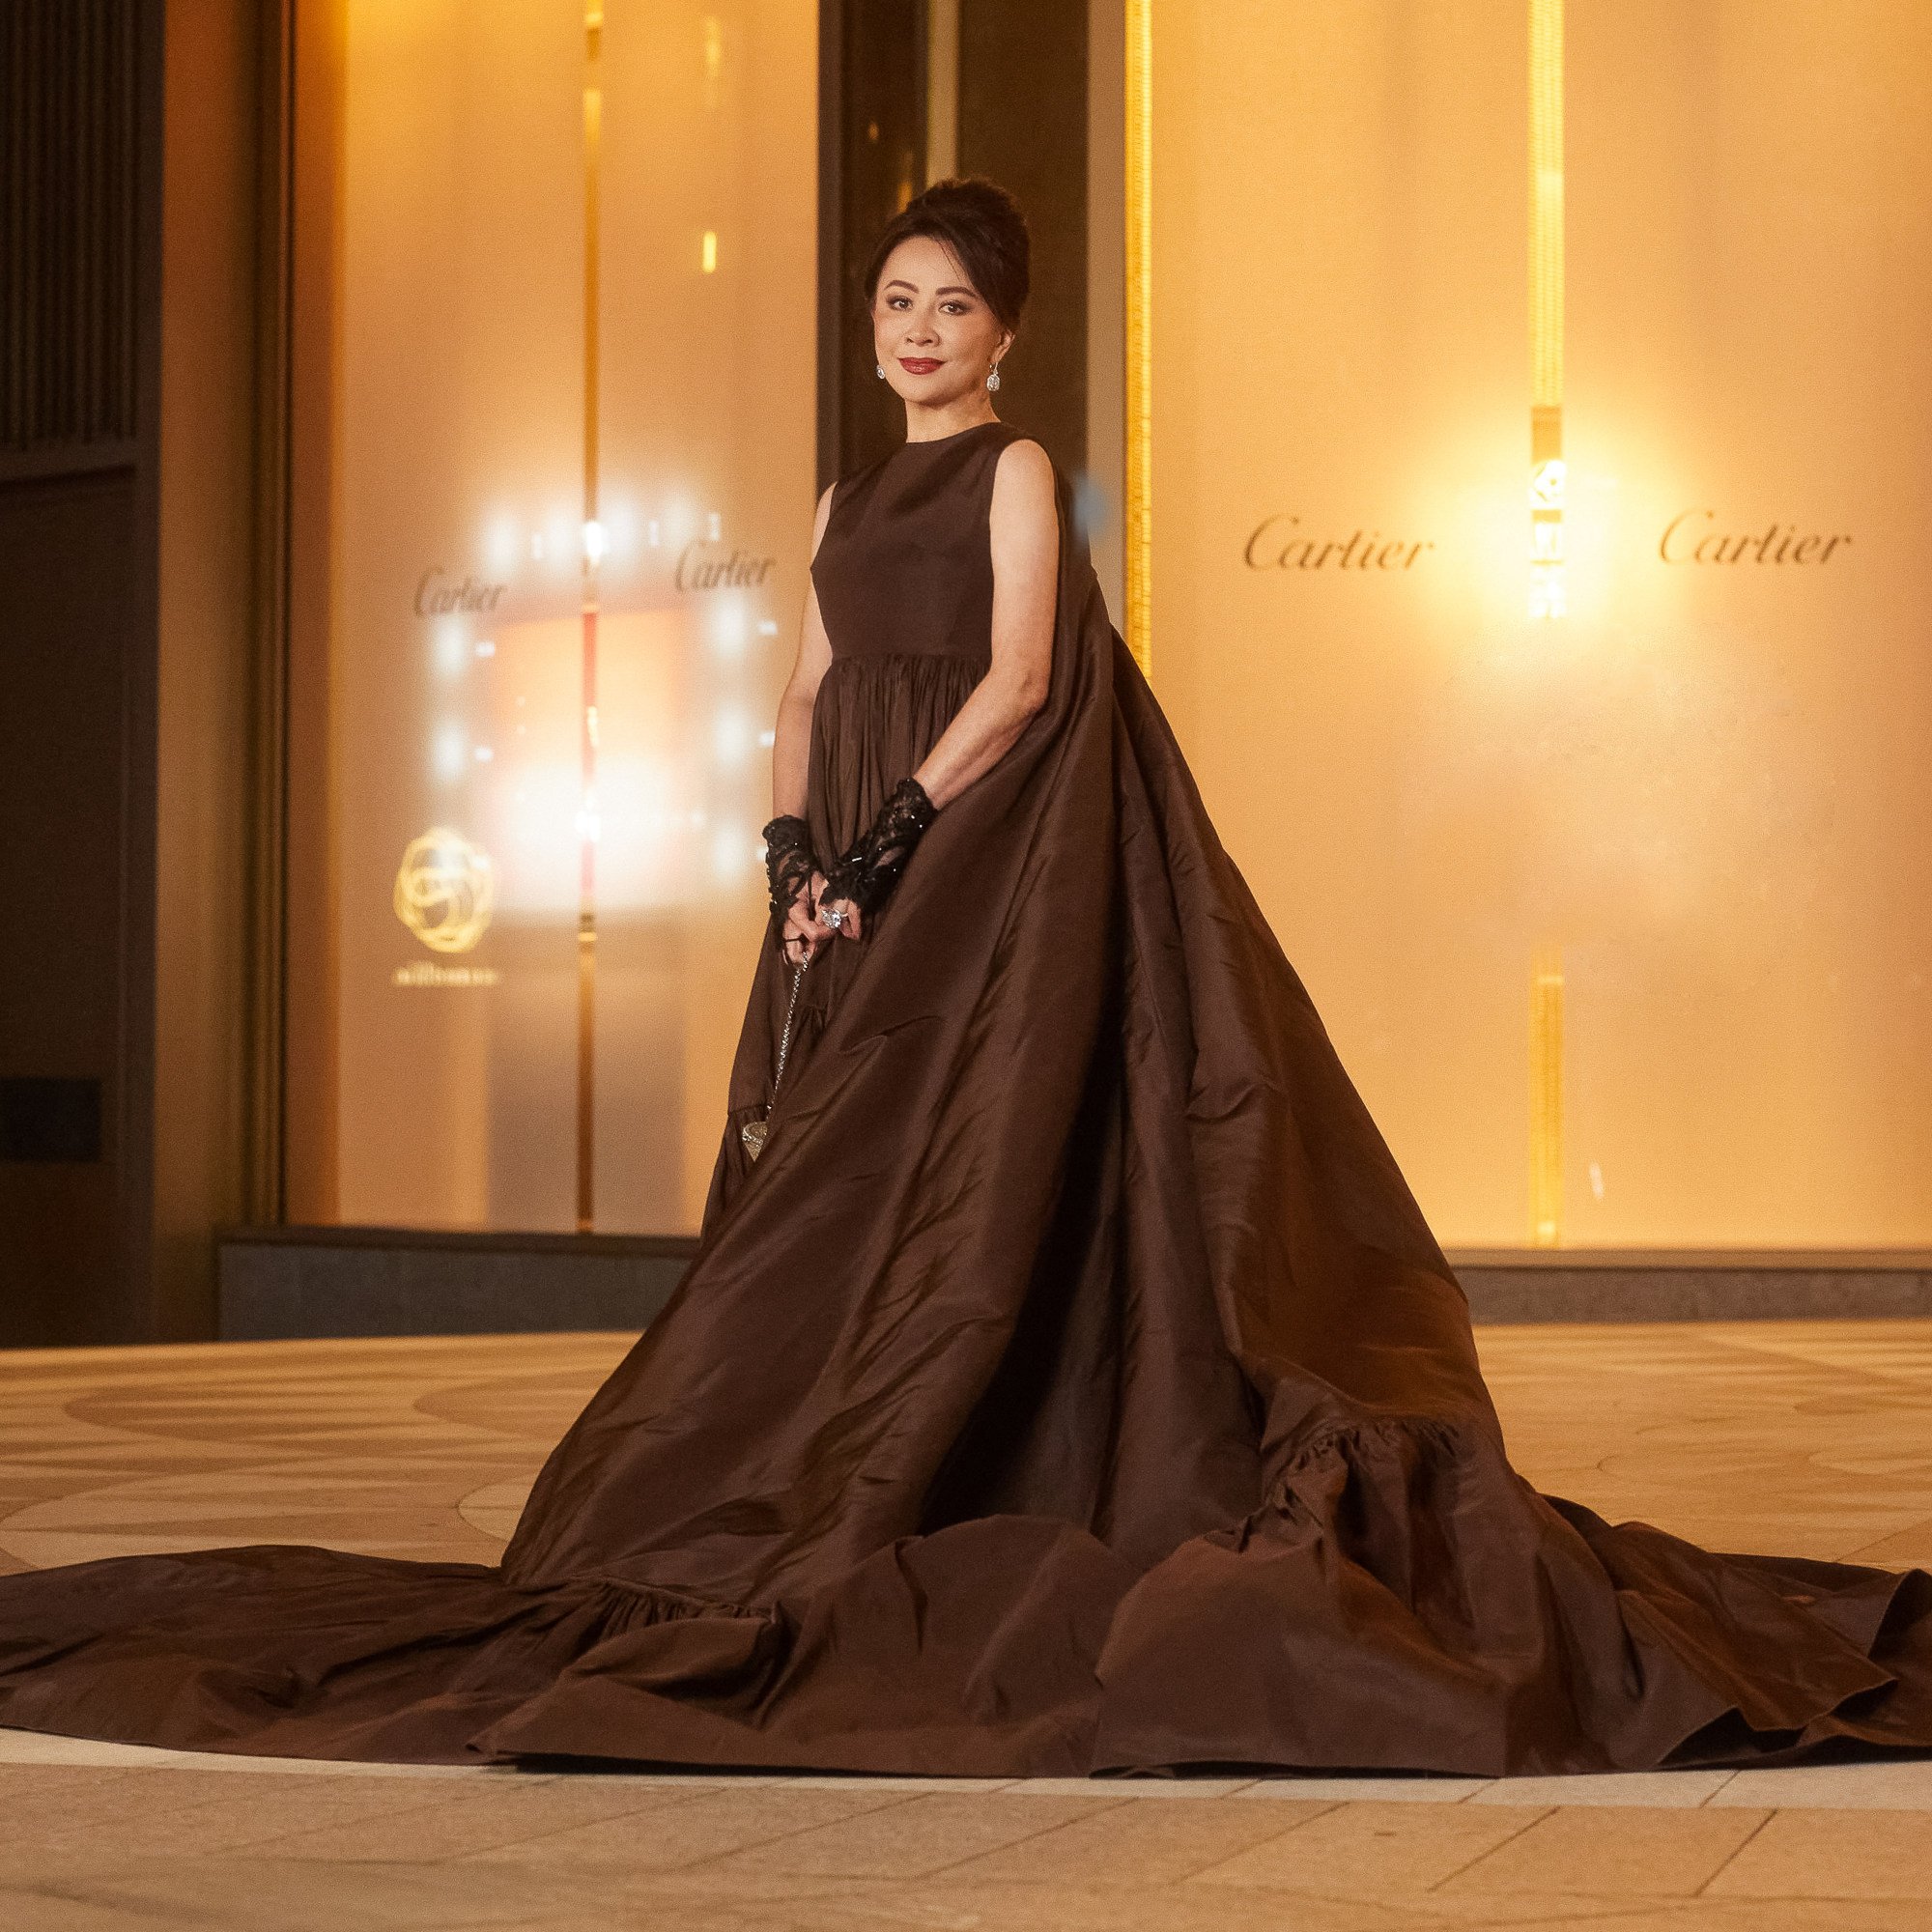 11 of Carina Lau's most exquisite luxury handbags: the Hong Kong icon  spends her US$60 million net worth on Hermès Kelly, Dior Book Tote, Louis  Vuitton Petite Malle and Bulgari Serpenti Forever